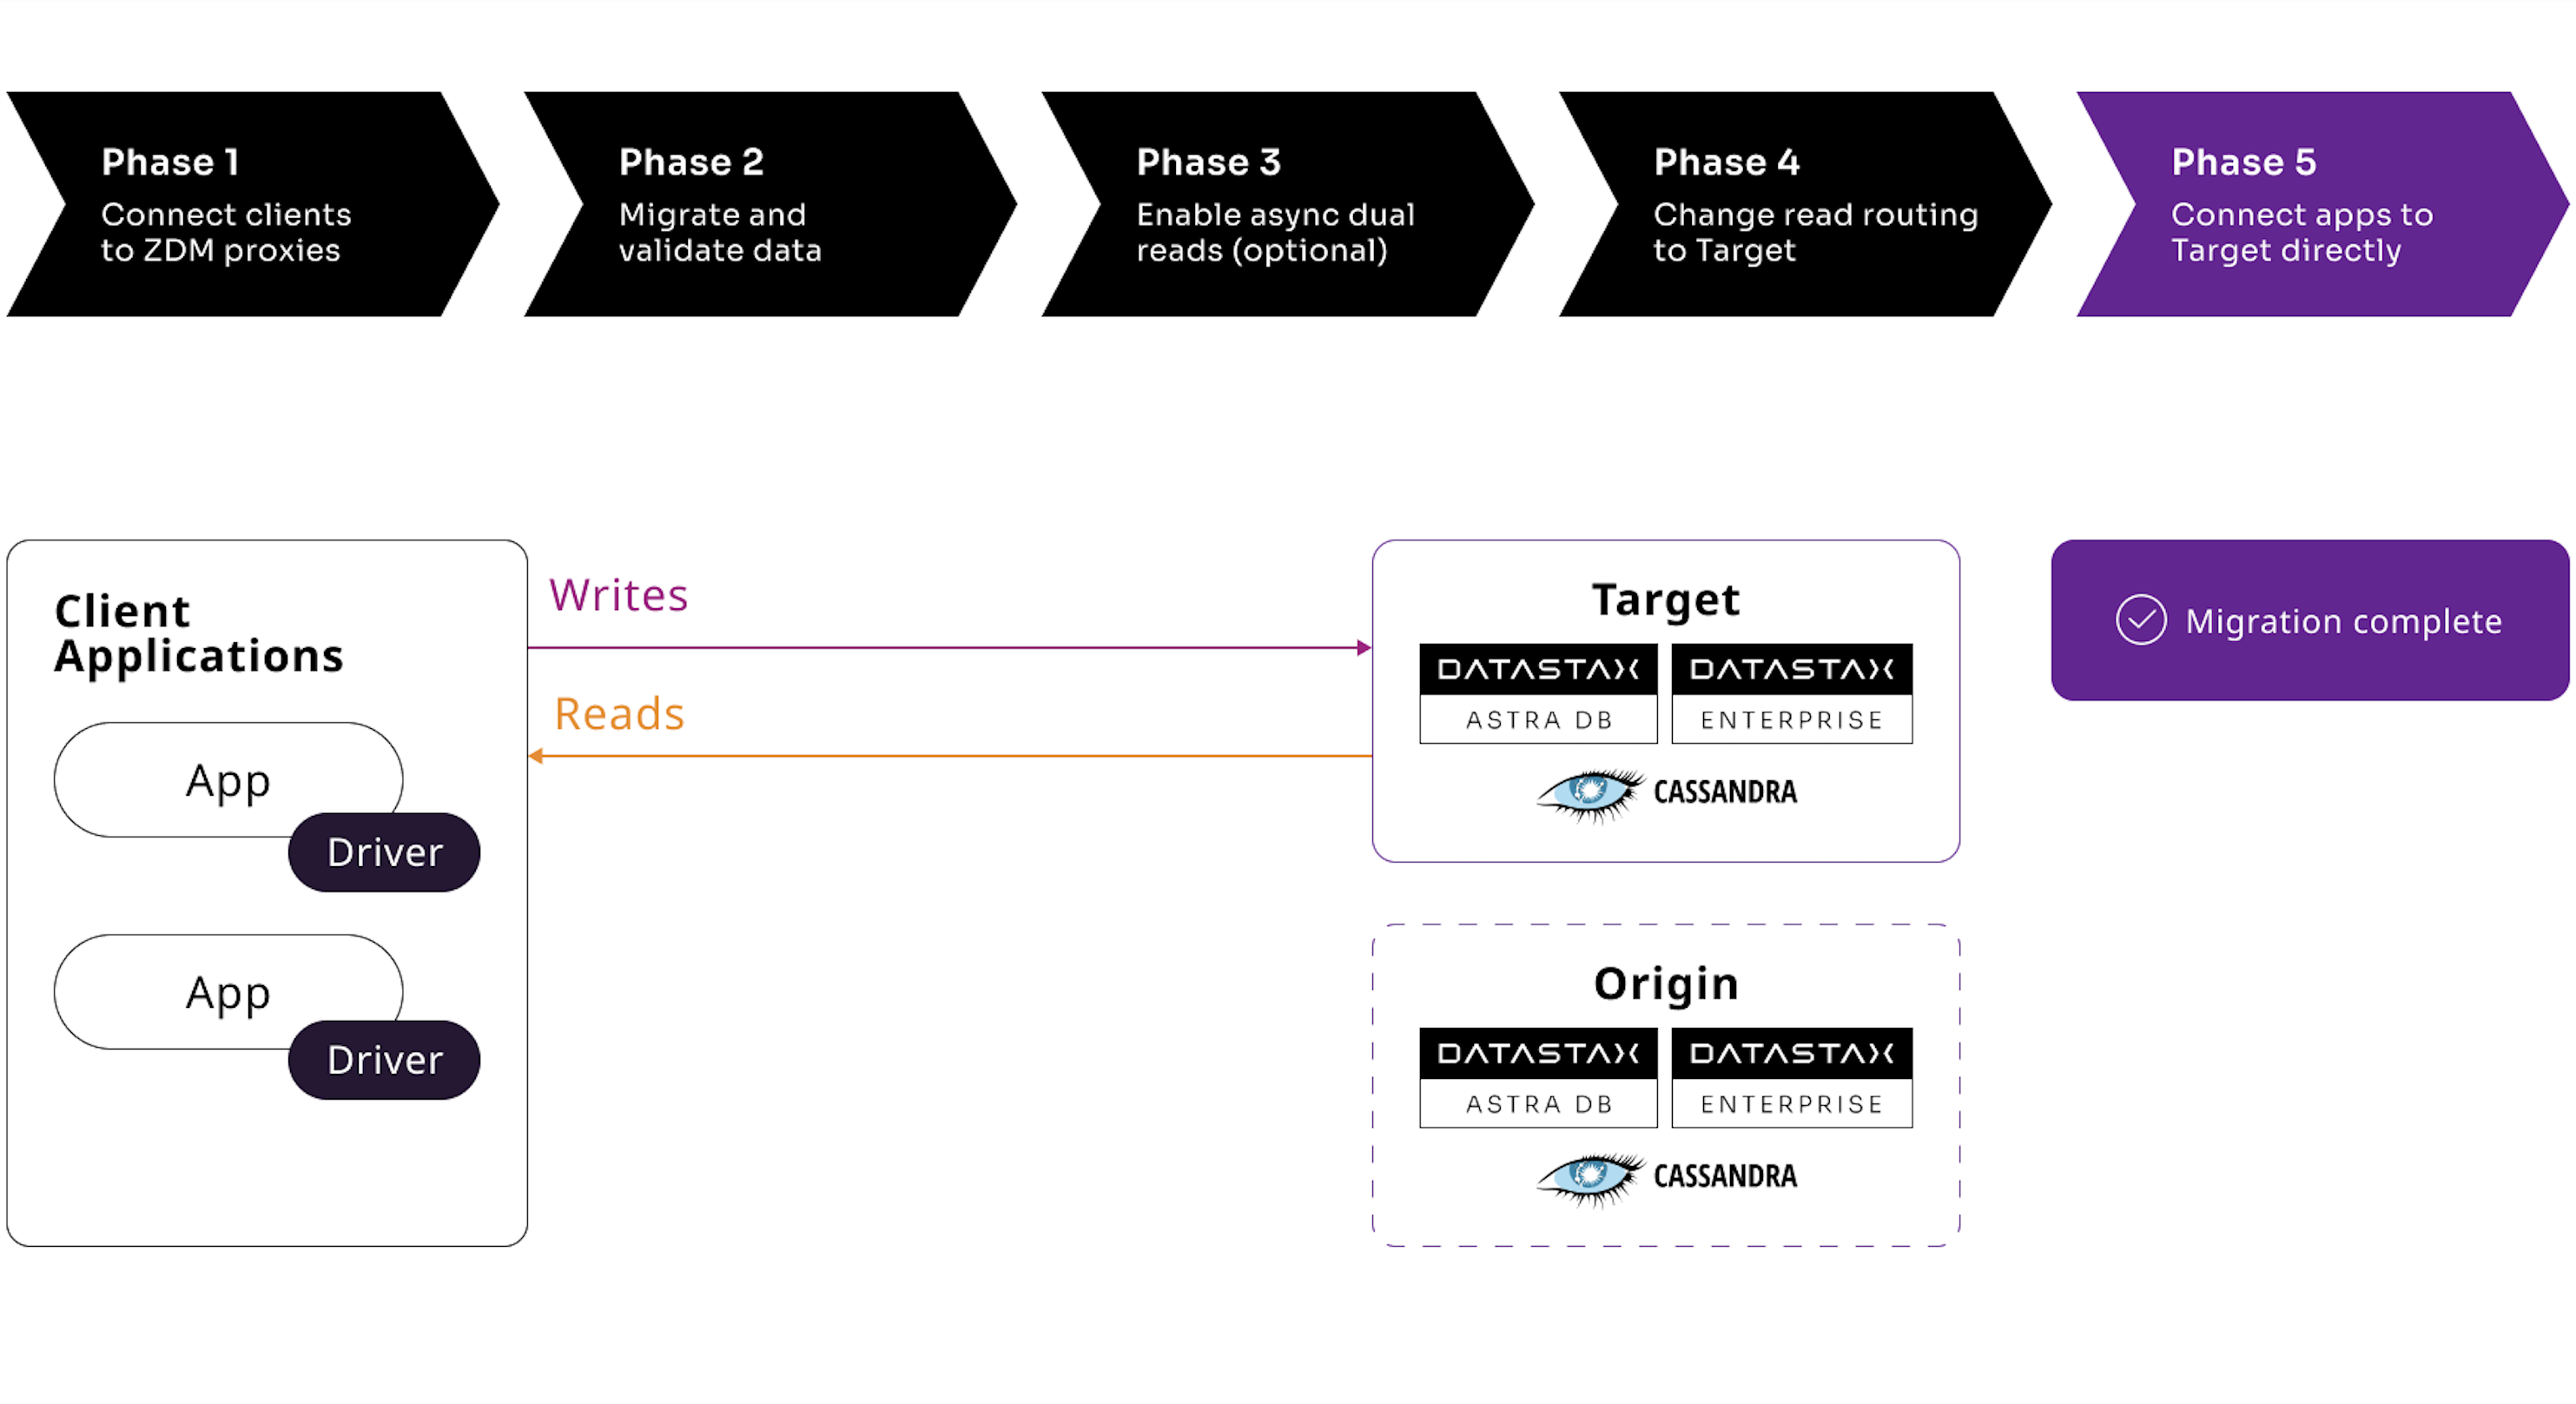 Phase 5 diagram shows apps no longer using proxy and instead connected directly to Target.